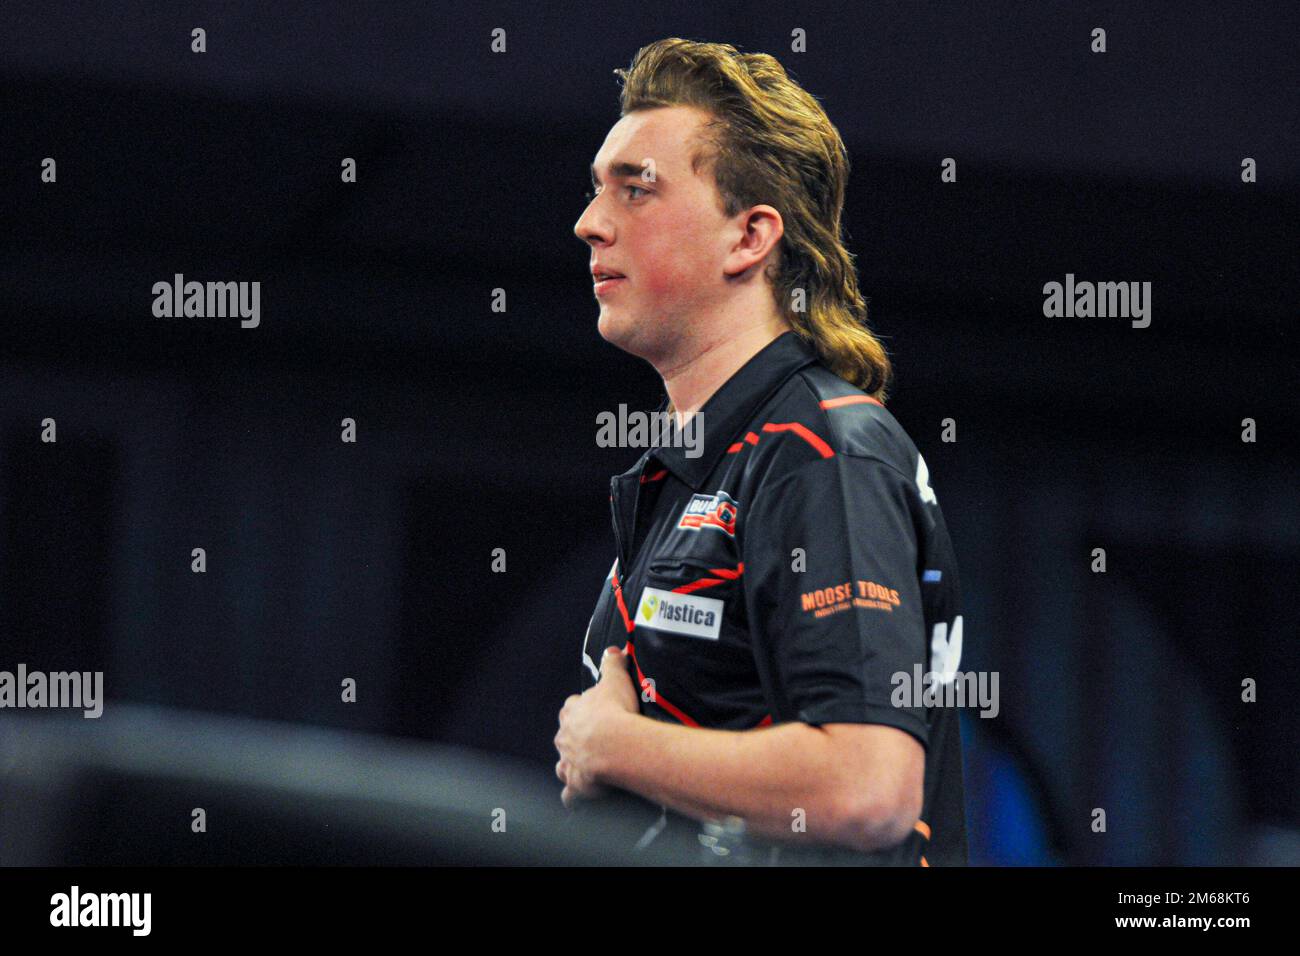 LONDON, ENGLAND - DECEMBER 19: Danny Jansen of the Netherlands looks on  during Day Five of the Cazoo World Darts Championship at Alexandra Palace  on December 12, 2022 in London, England. (Photo